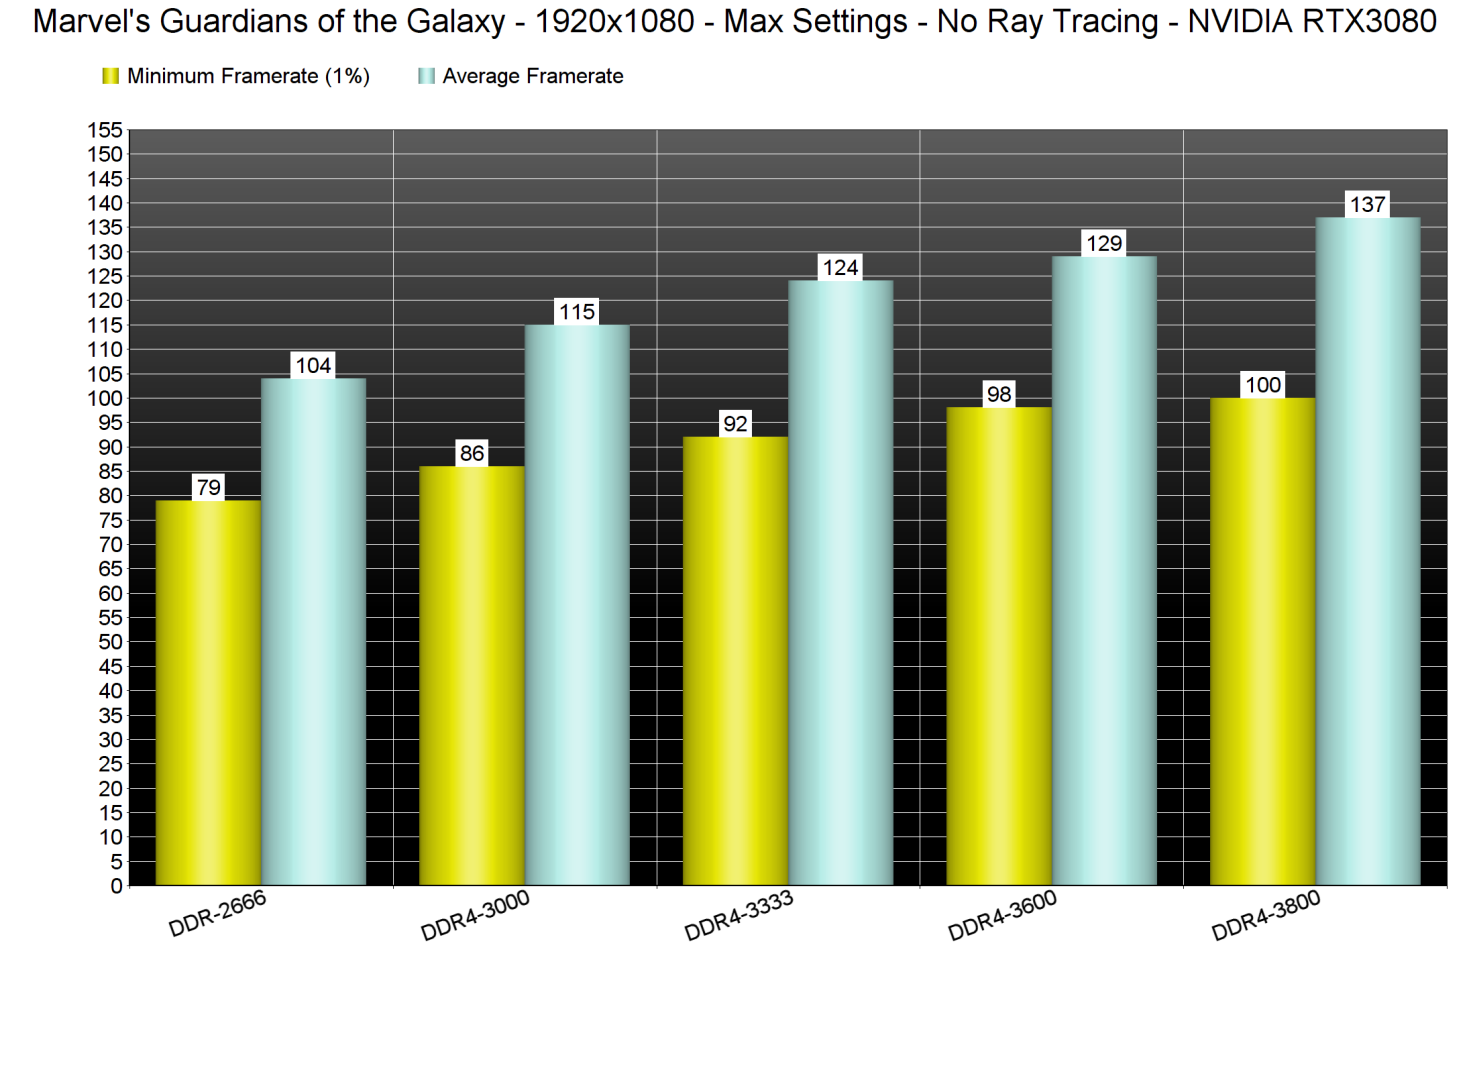 Marvel's Guardians of the Galaxy memory benchmarks